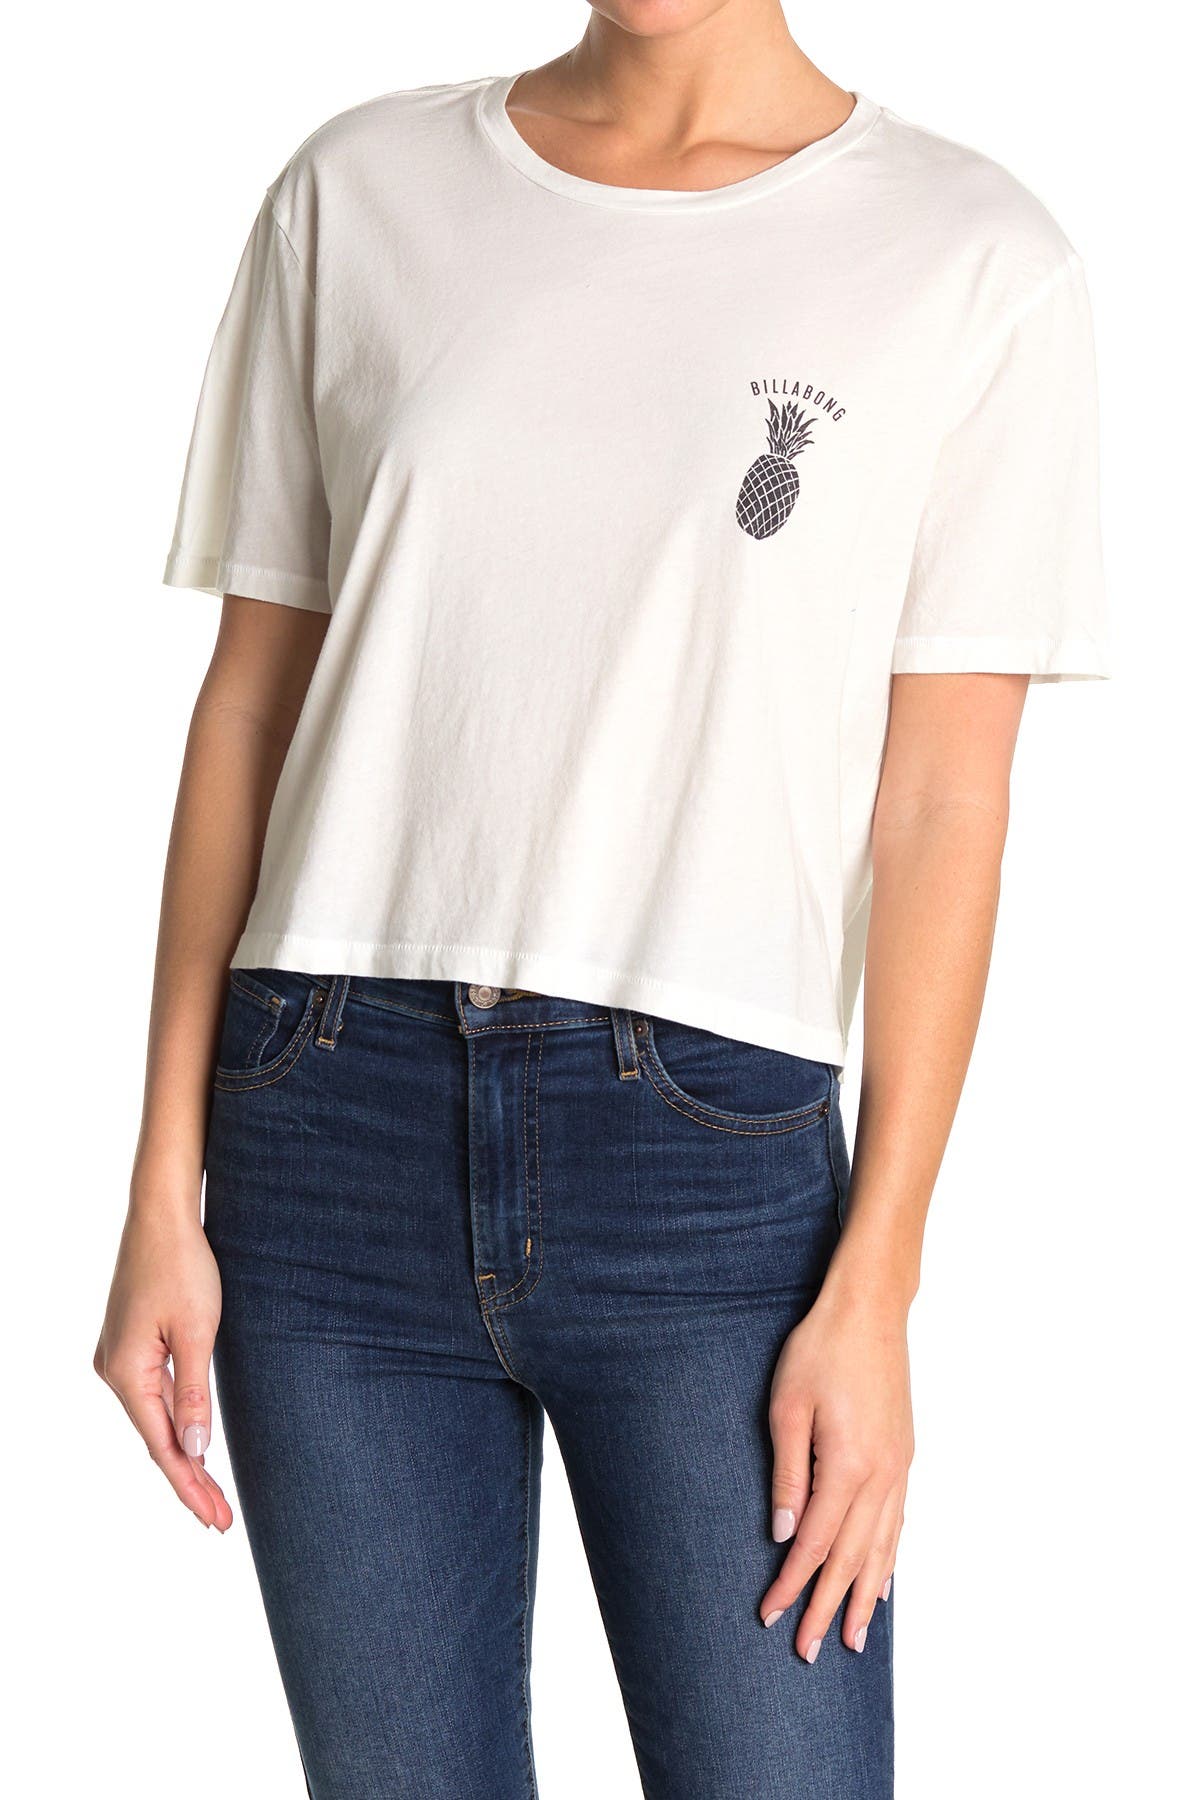 Billabong Dazed Day Cropped Tee In Natural5